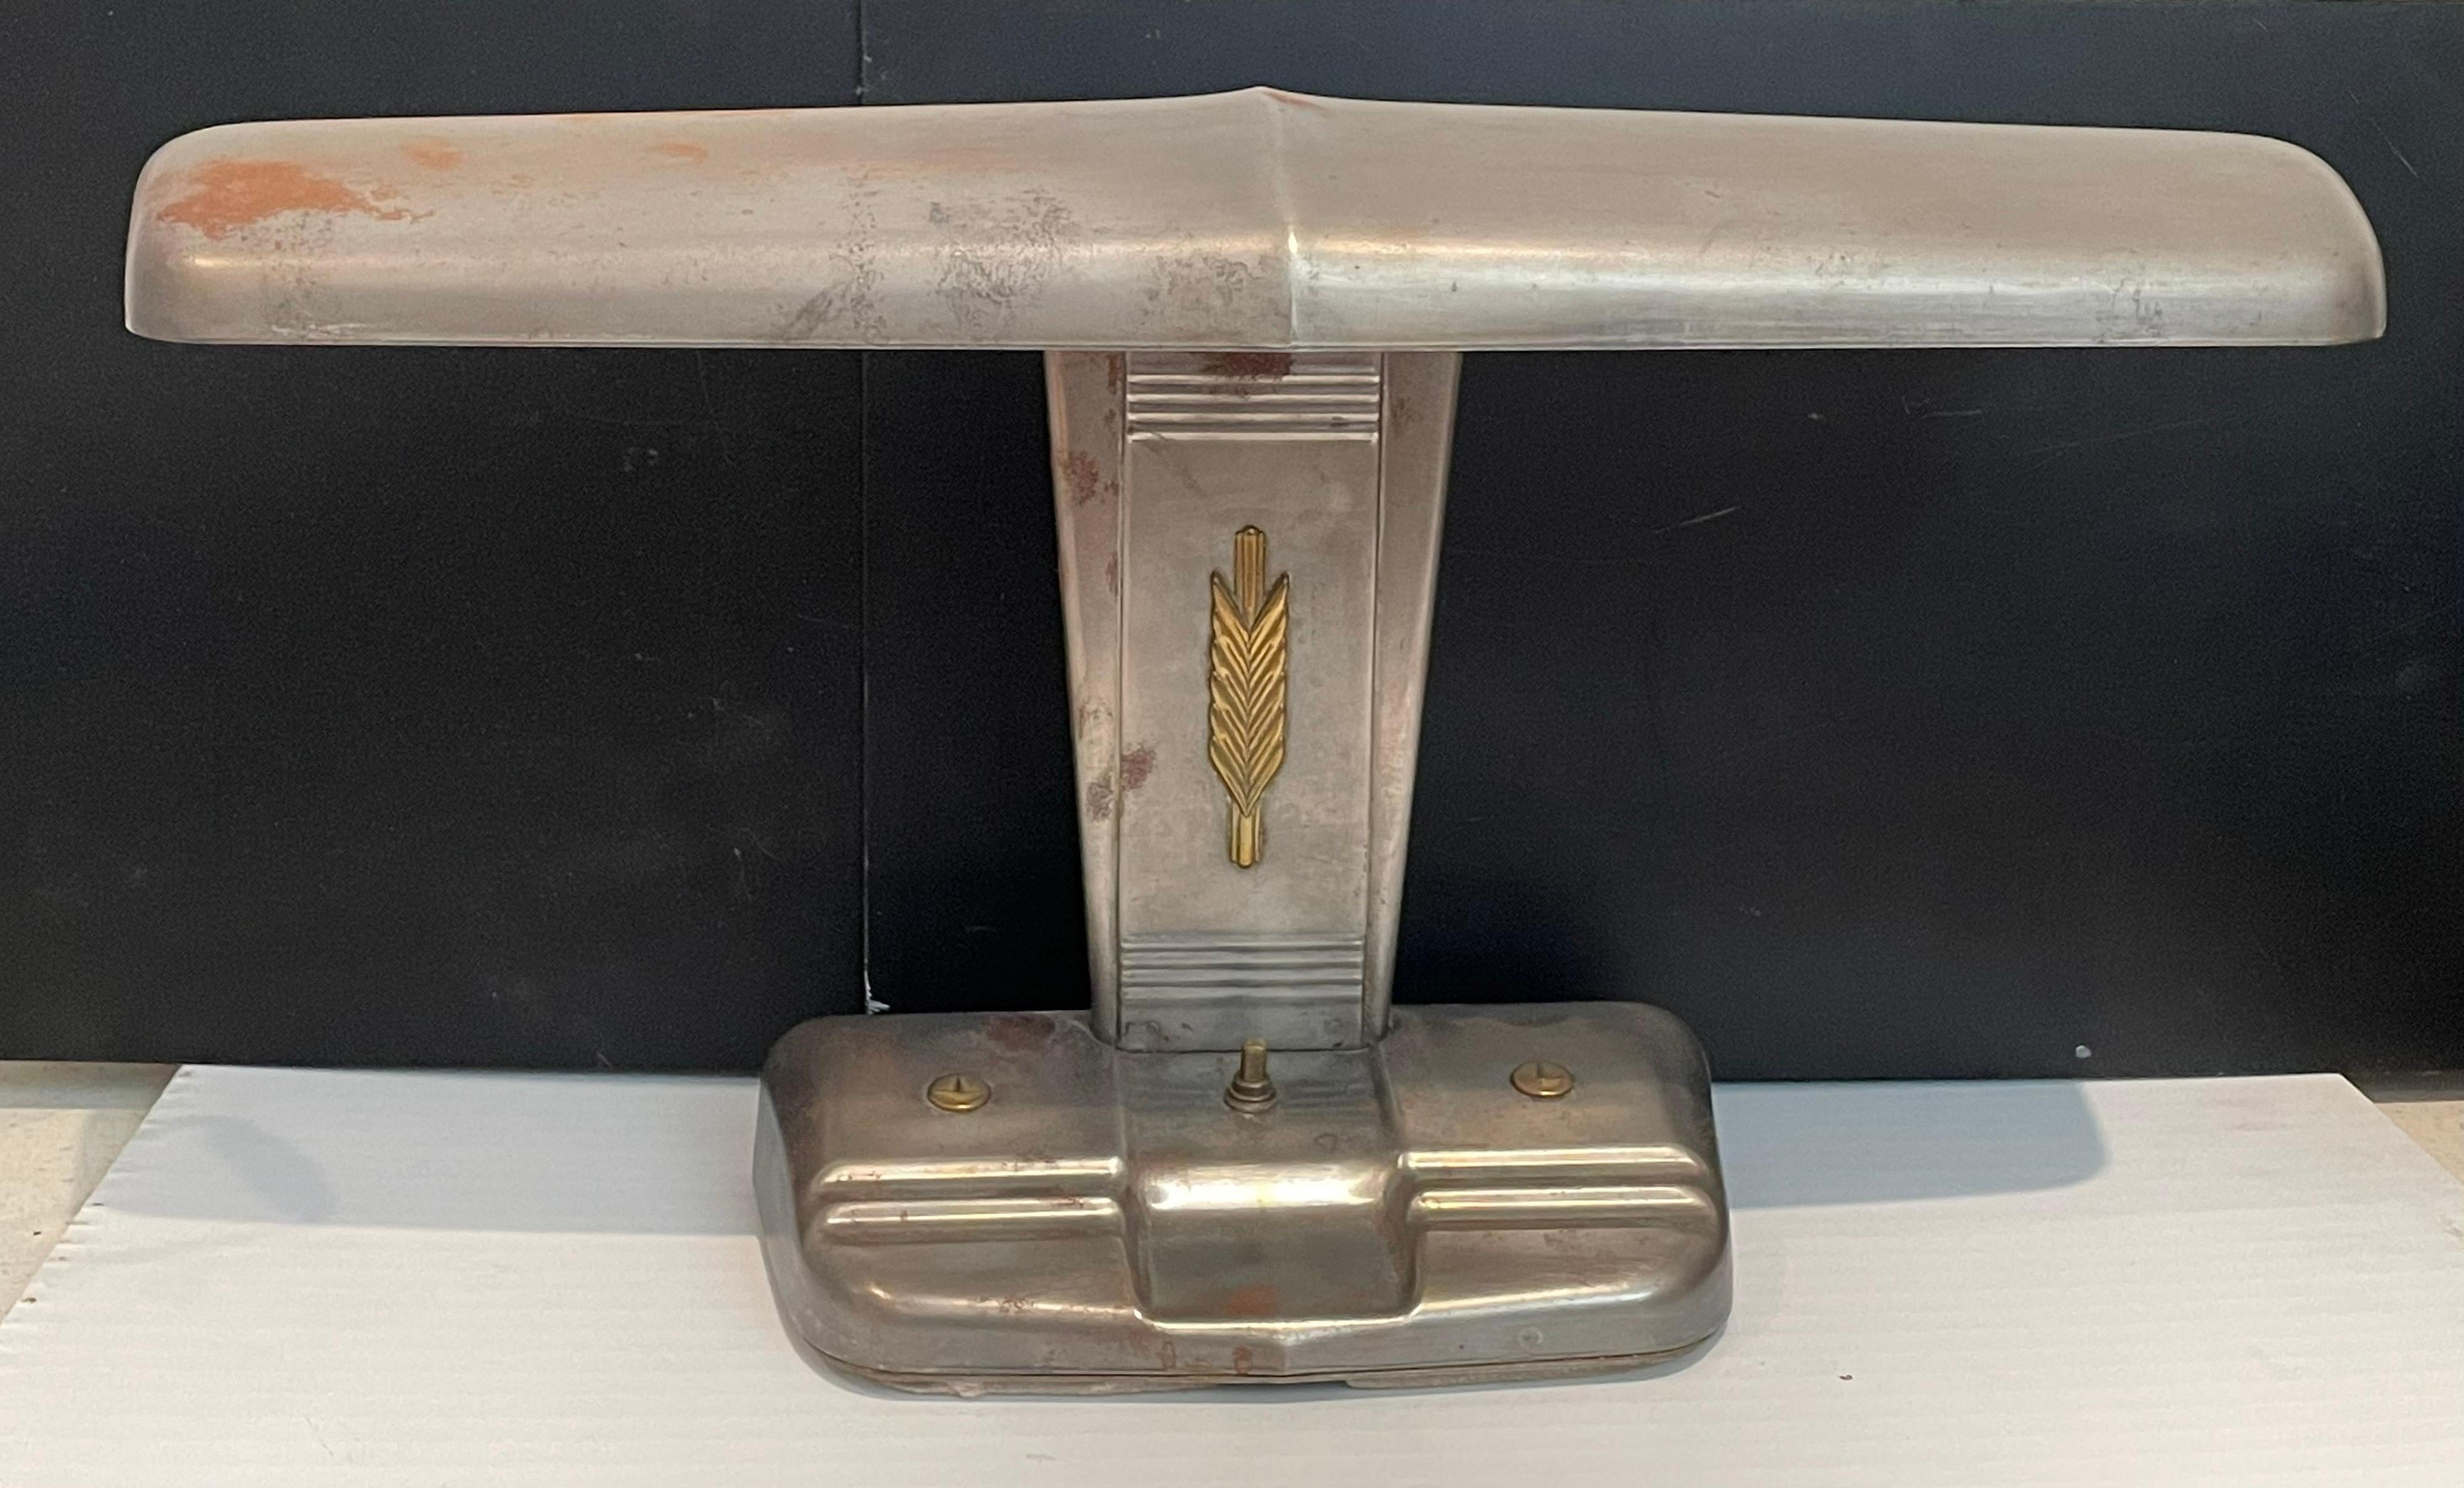 A very cool airplane tail desk lamp this lamp has been stripped and left in the original metal finish with some patina due to age, great brass accents with push-off/on switch. and in perfect working condition.